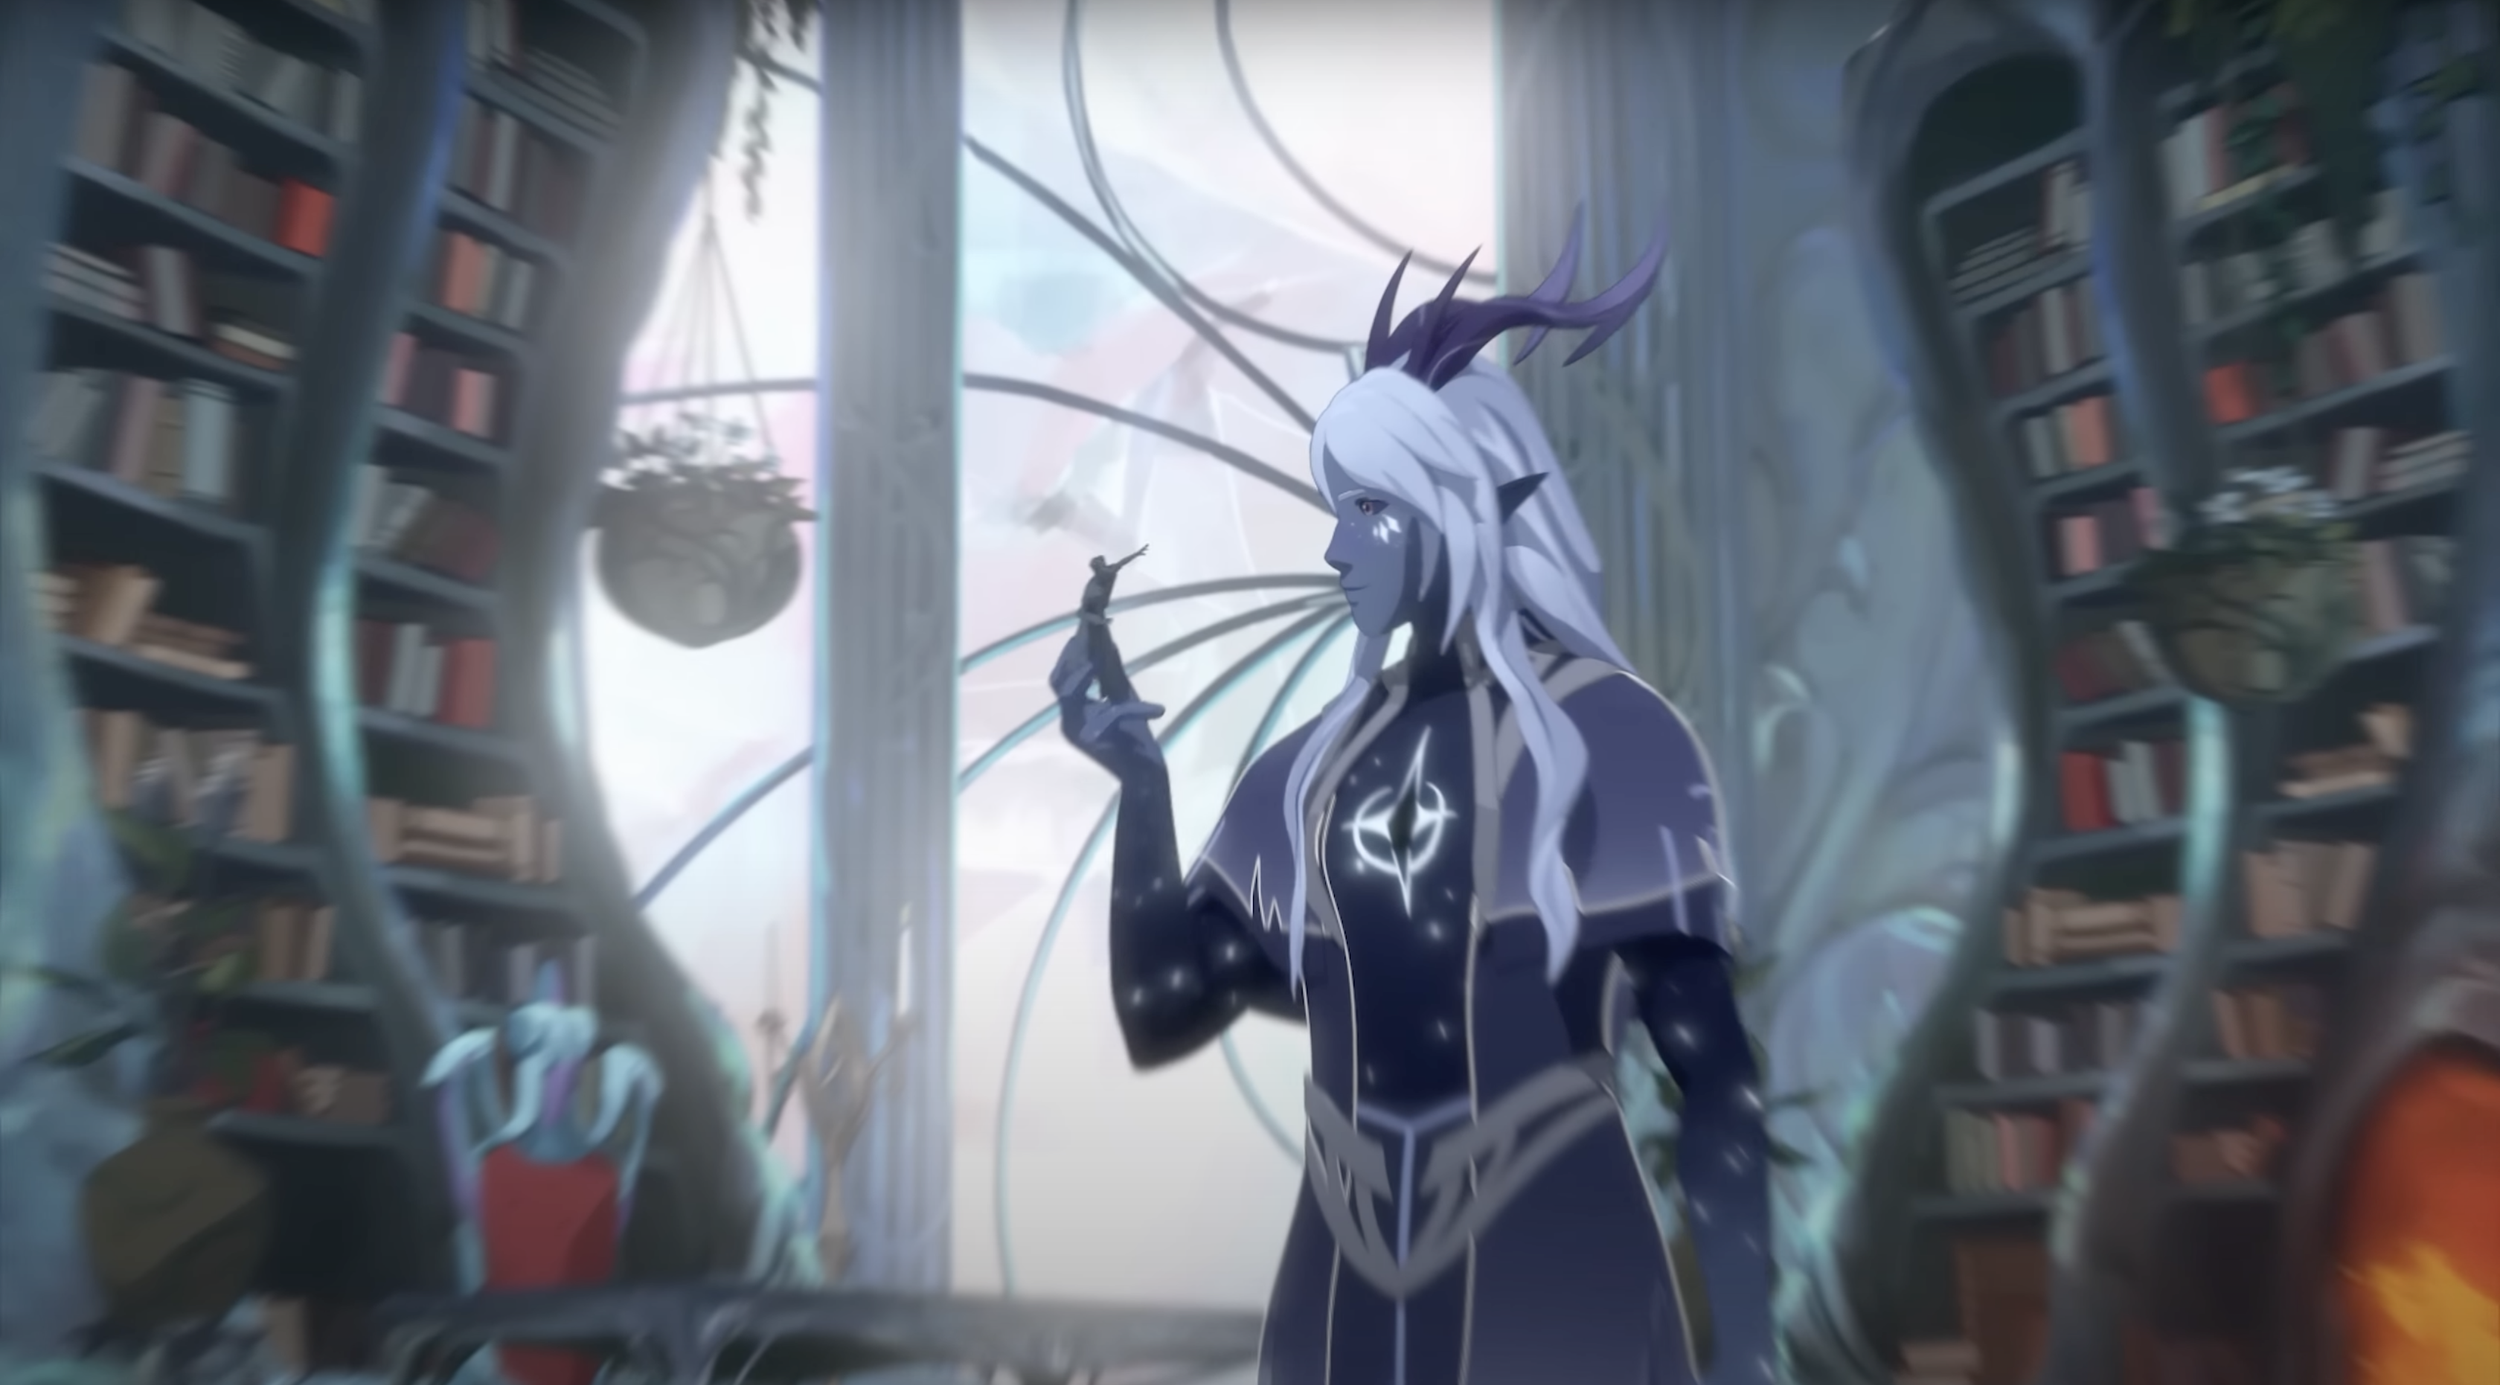 THE DRAGON PRINCE Drops a Teaser for Season 4 Which Starts MYSTERY OF AARAVOS